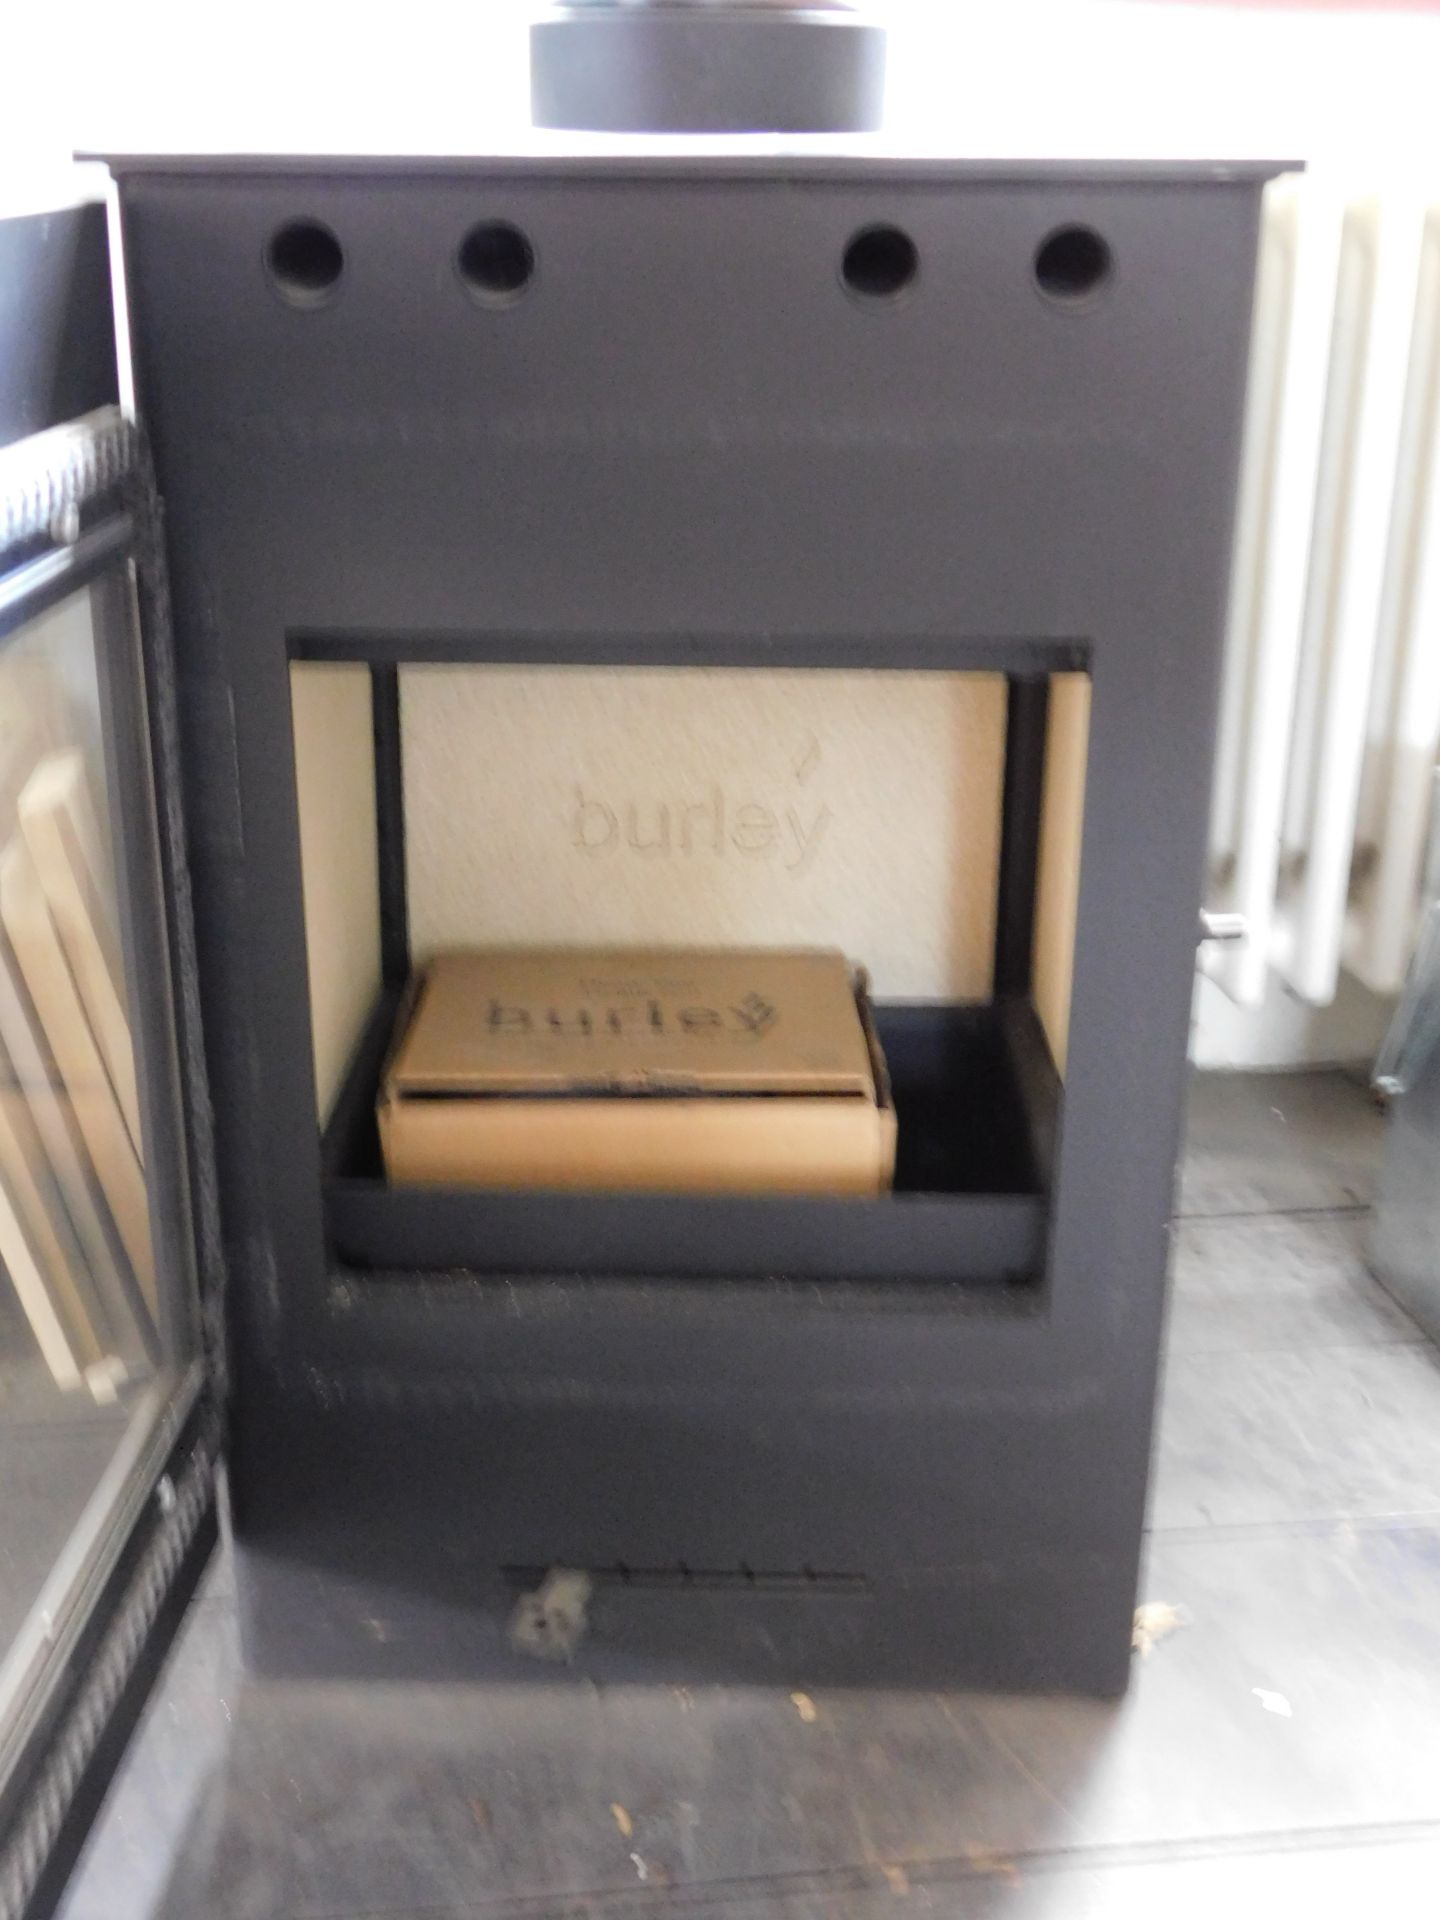 Ex-Display Burley “Bradgate 5kw Woodburning Stove (Where the company’s description/price information - Image 2 of 3